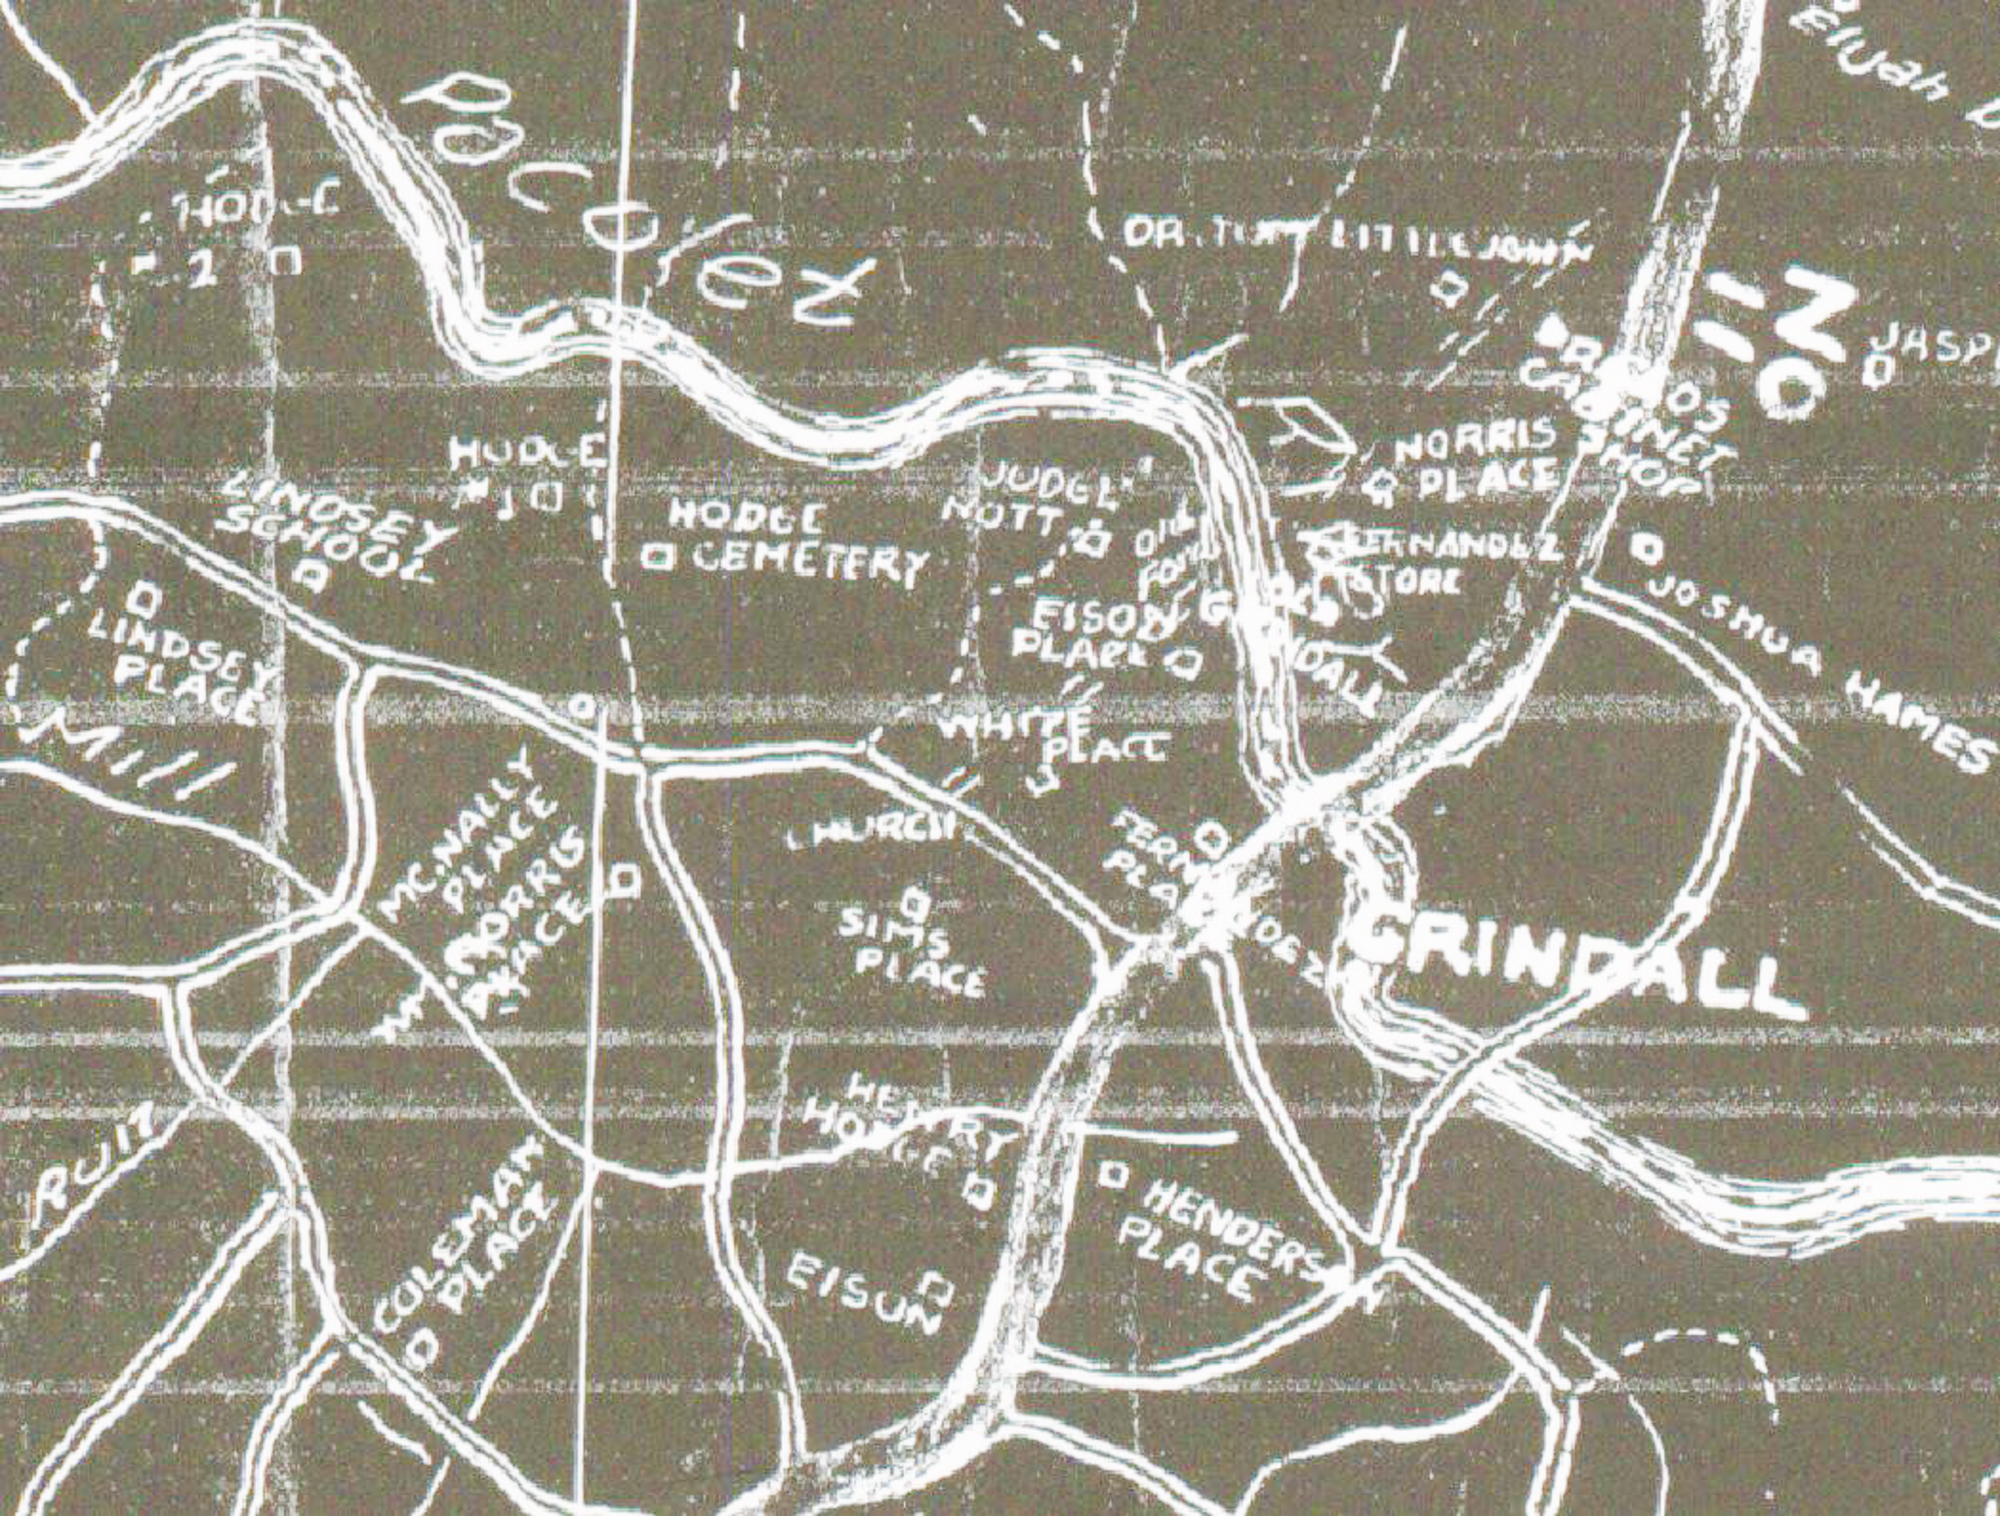 GRINDAL SHOALS MAP - AMOS COLLECTION